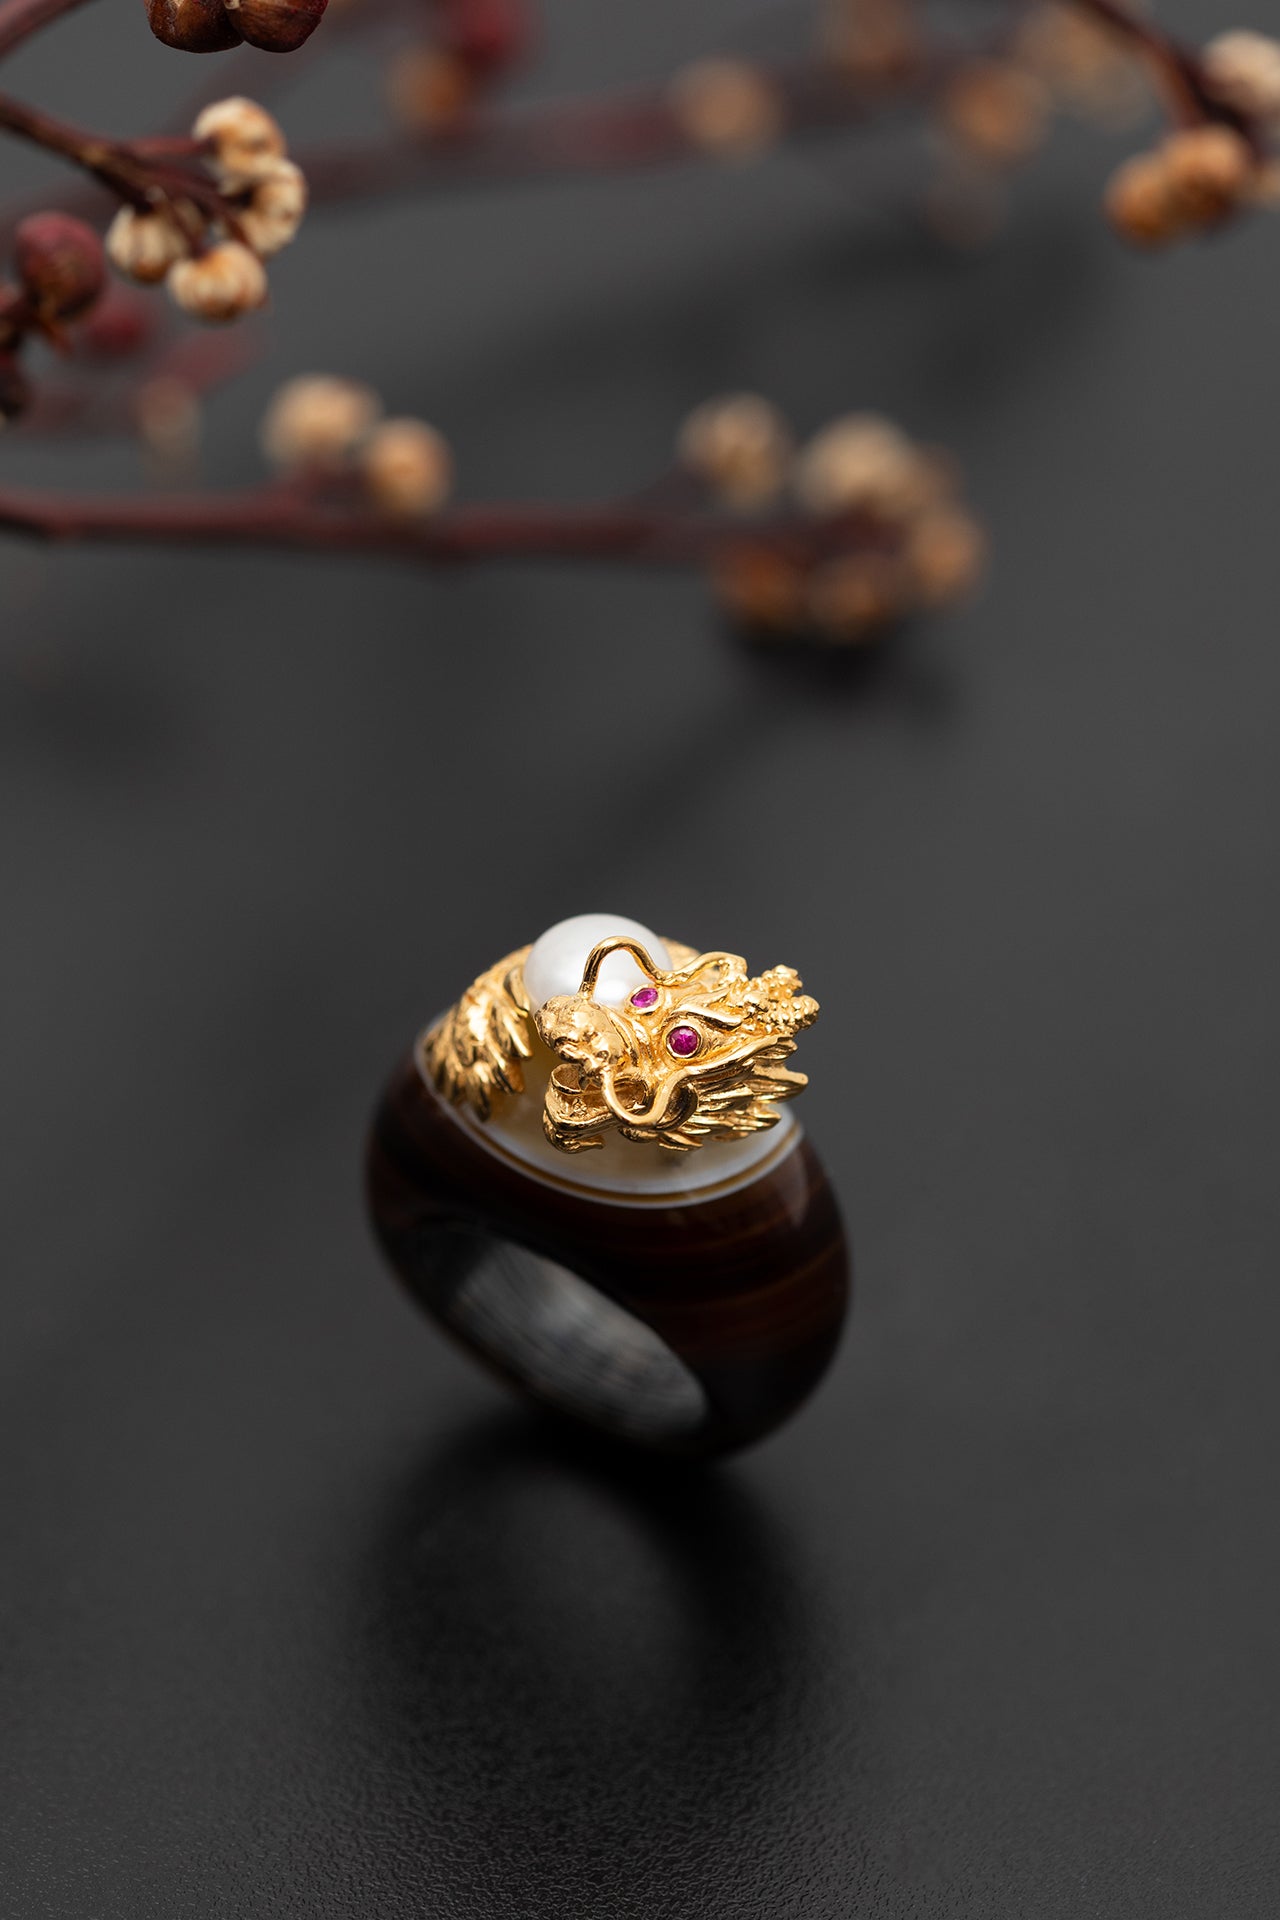 Golden Dragon and Agate Dome Ring